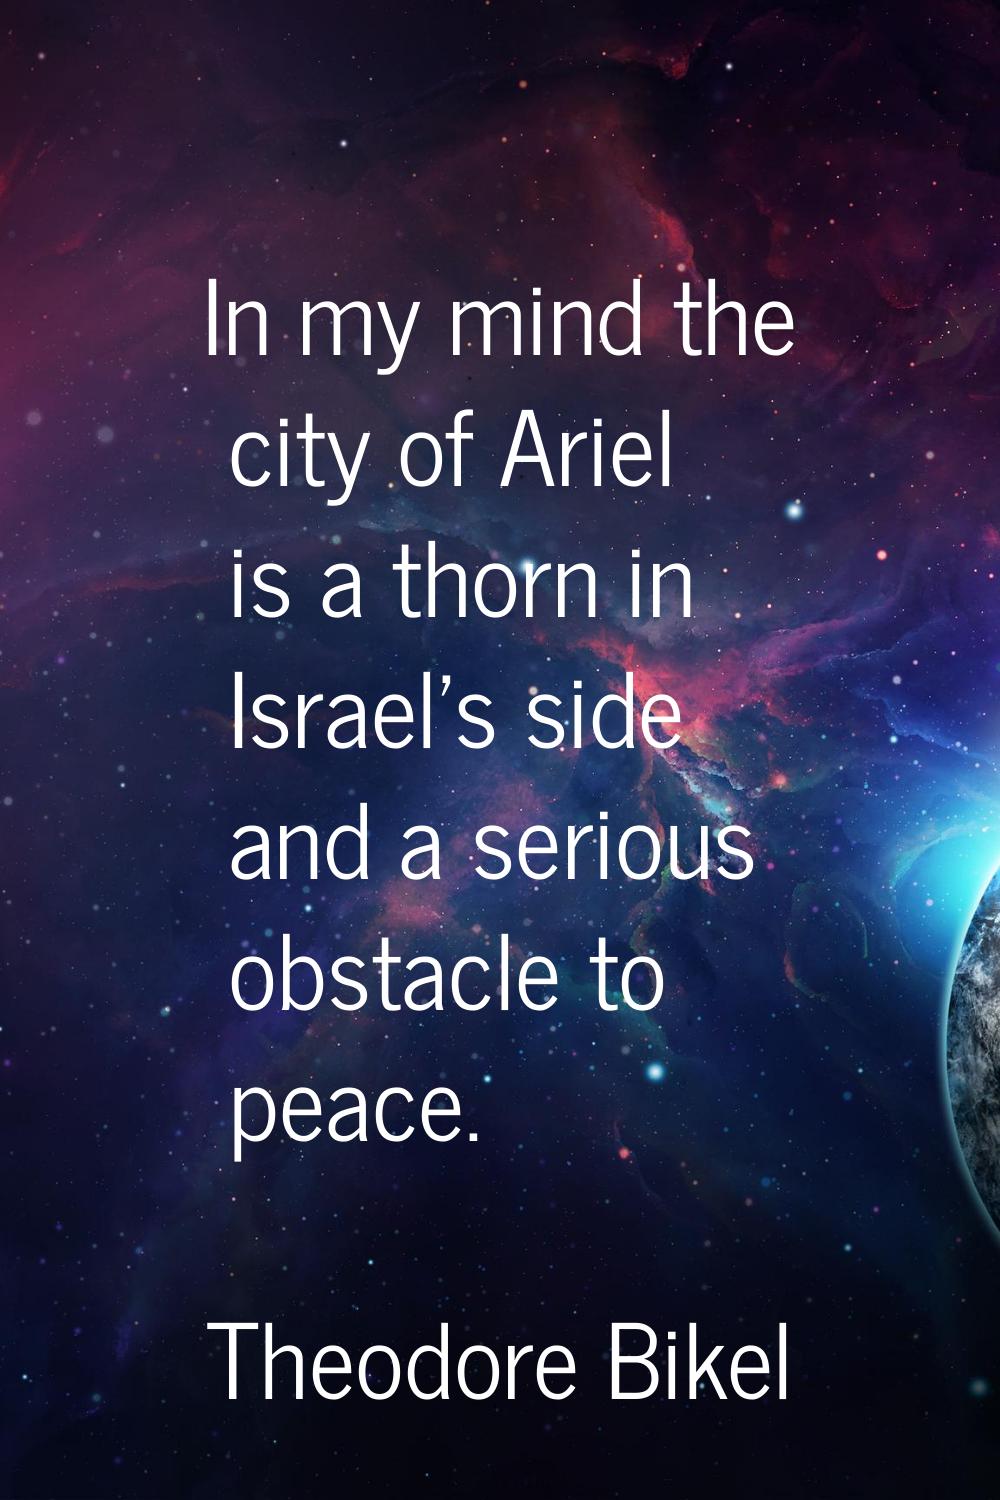 In my mind the city of Ariel is a thorn in Israel's side and a serious obstacle to peace.